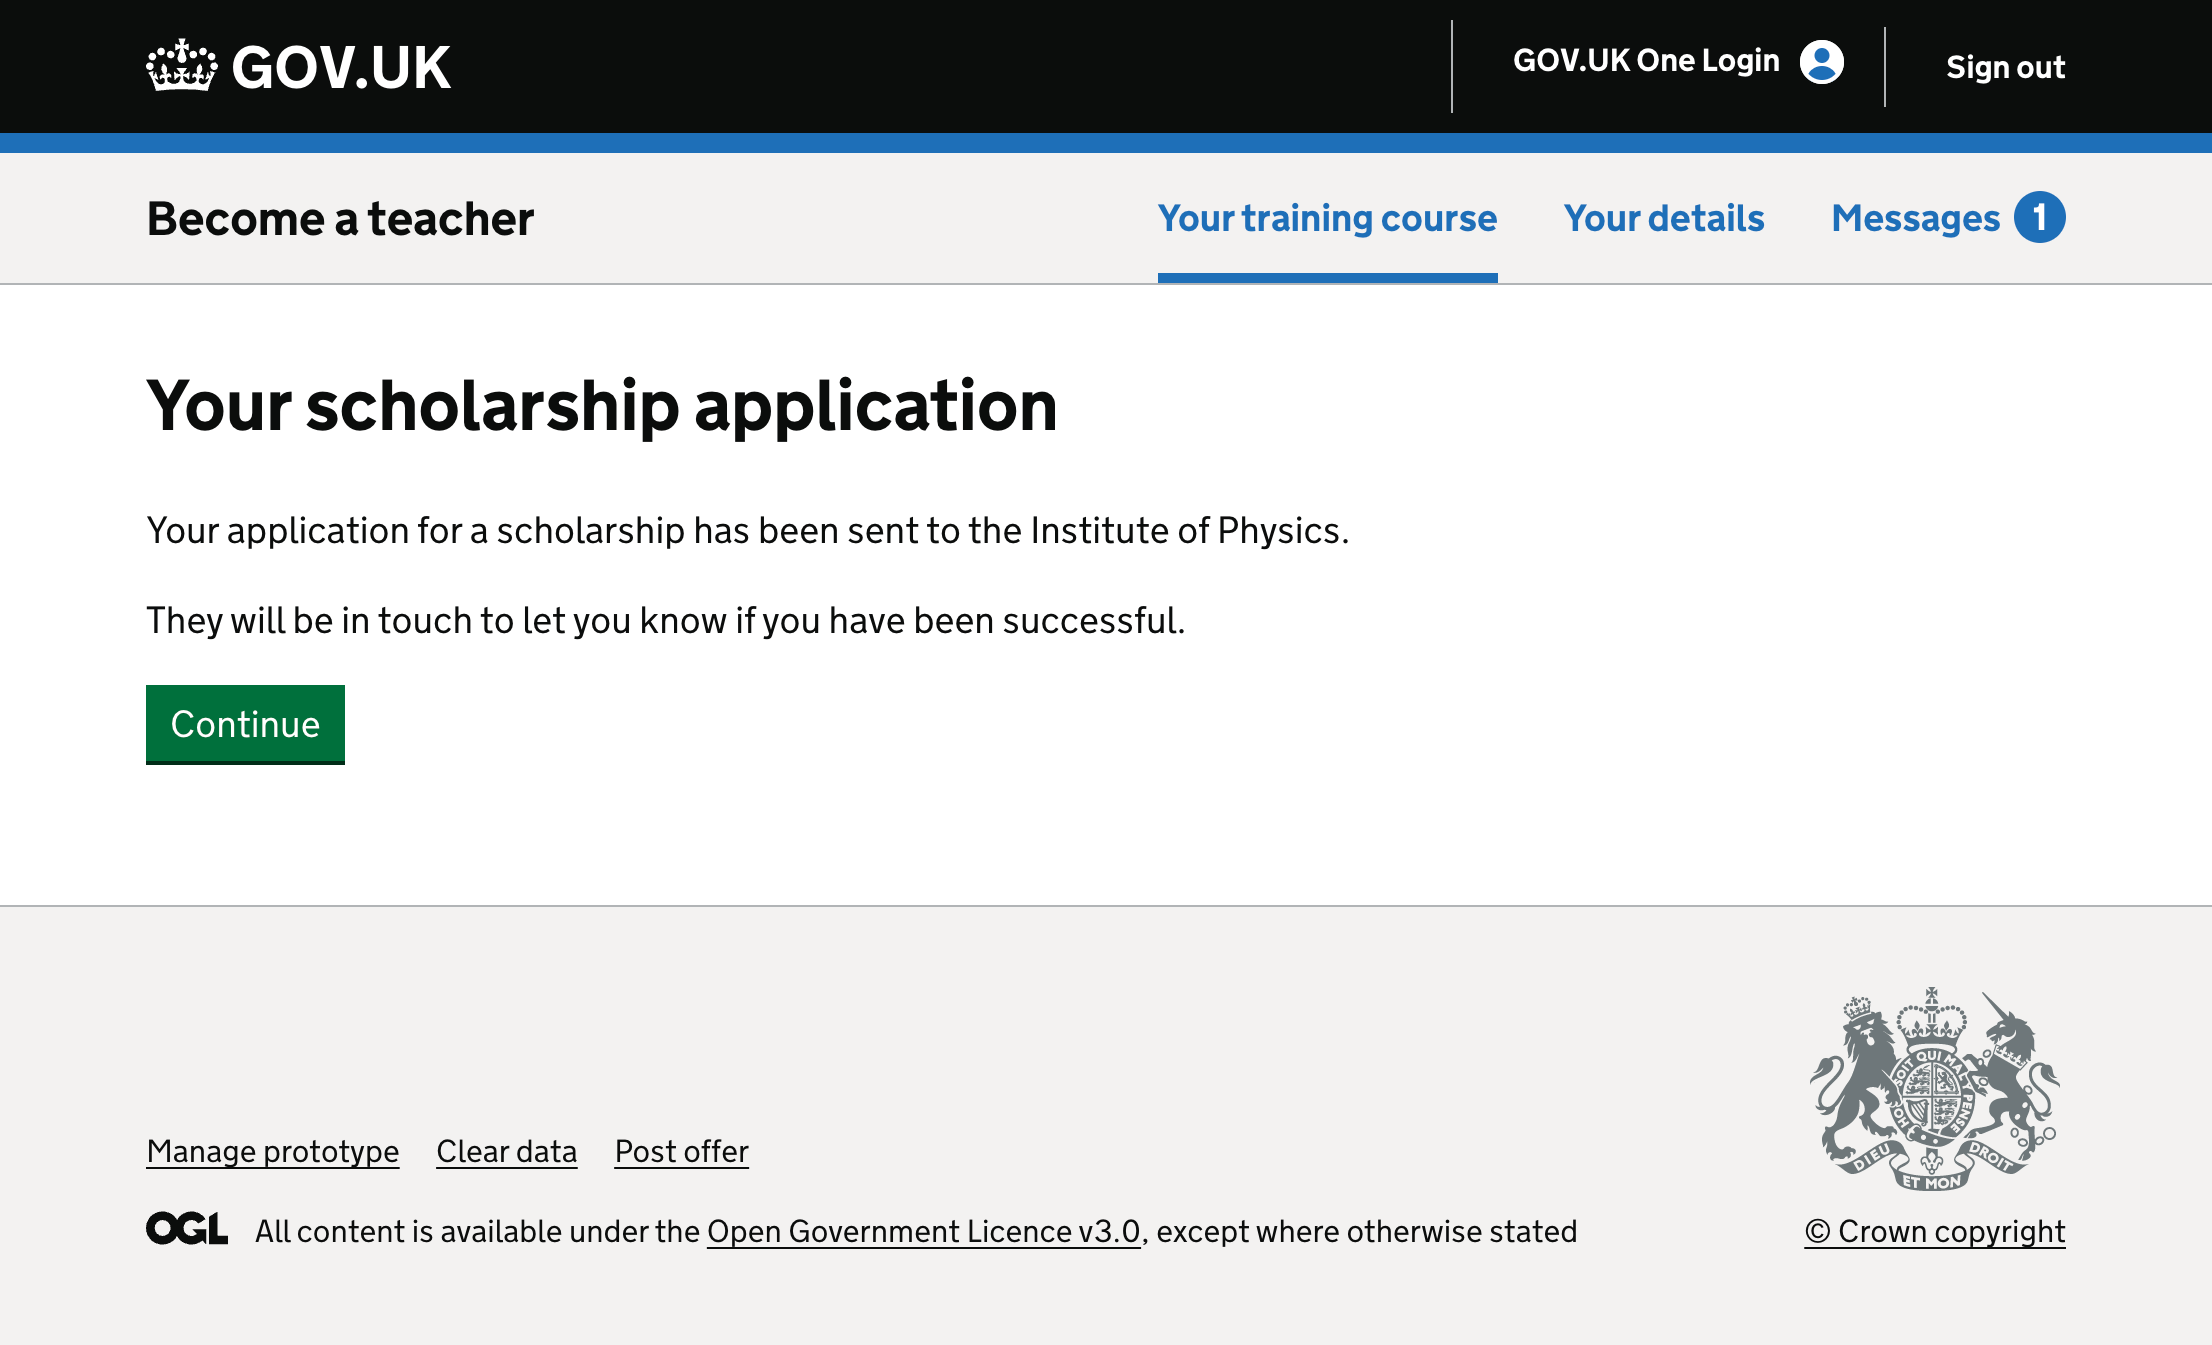 Screenshot showing a page confirming that a scholarship application has been sent